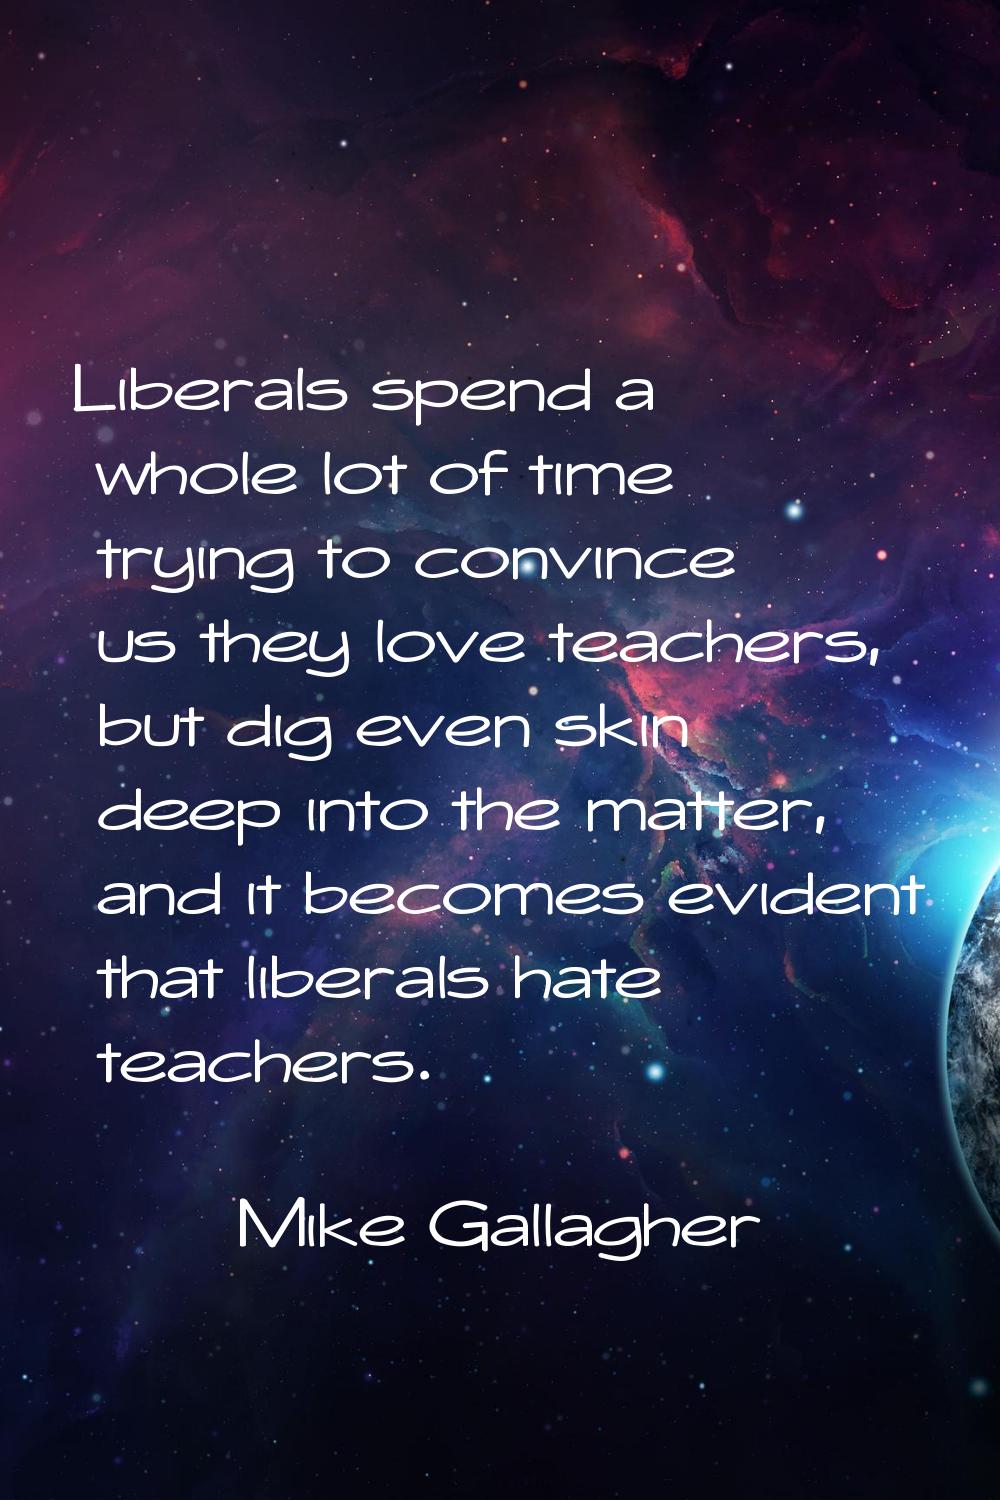 Liberals spend a whole lot of time trying to convince us they love teachers, but dig even skin deep